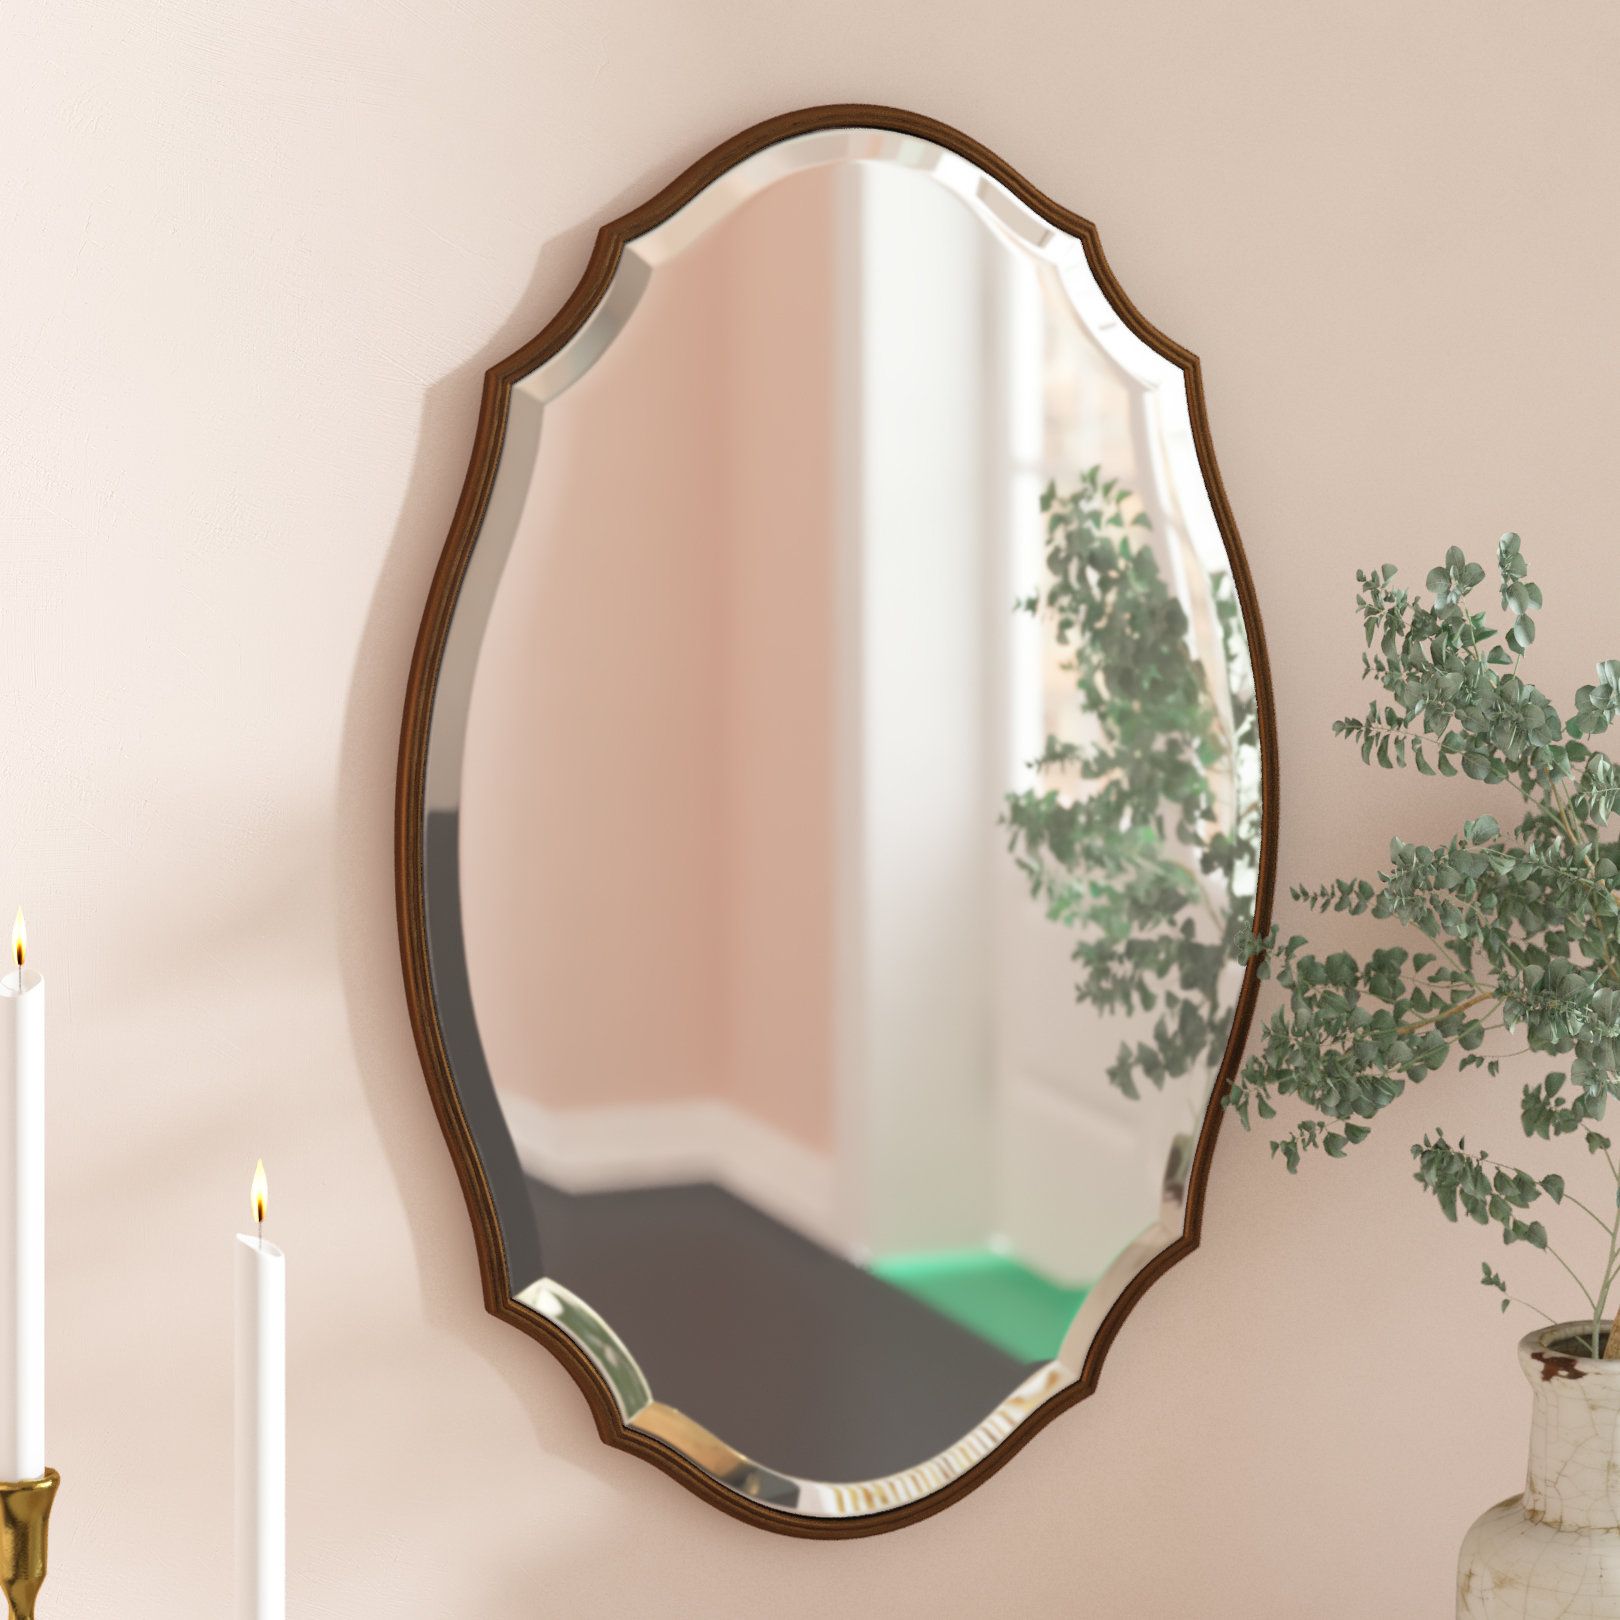 30 X 72 Mirror | Wayfair For Ulus Accent Mirrors (View 19 of 20)